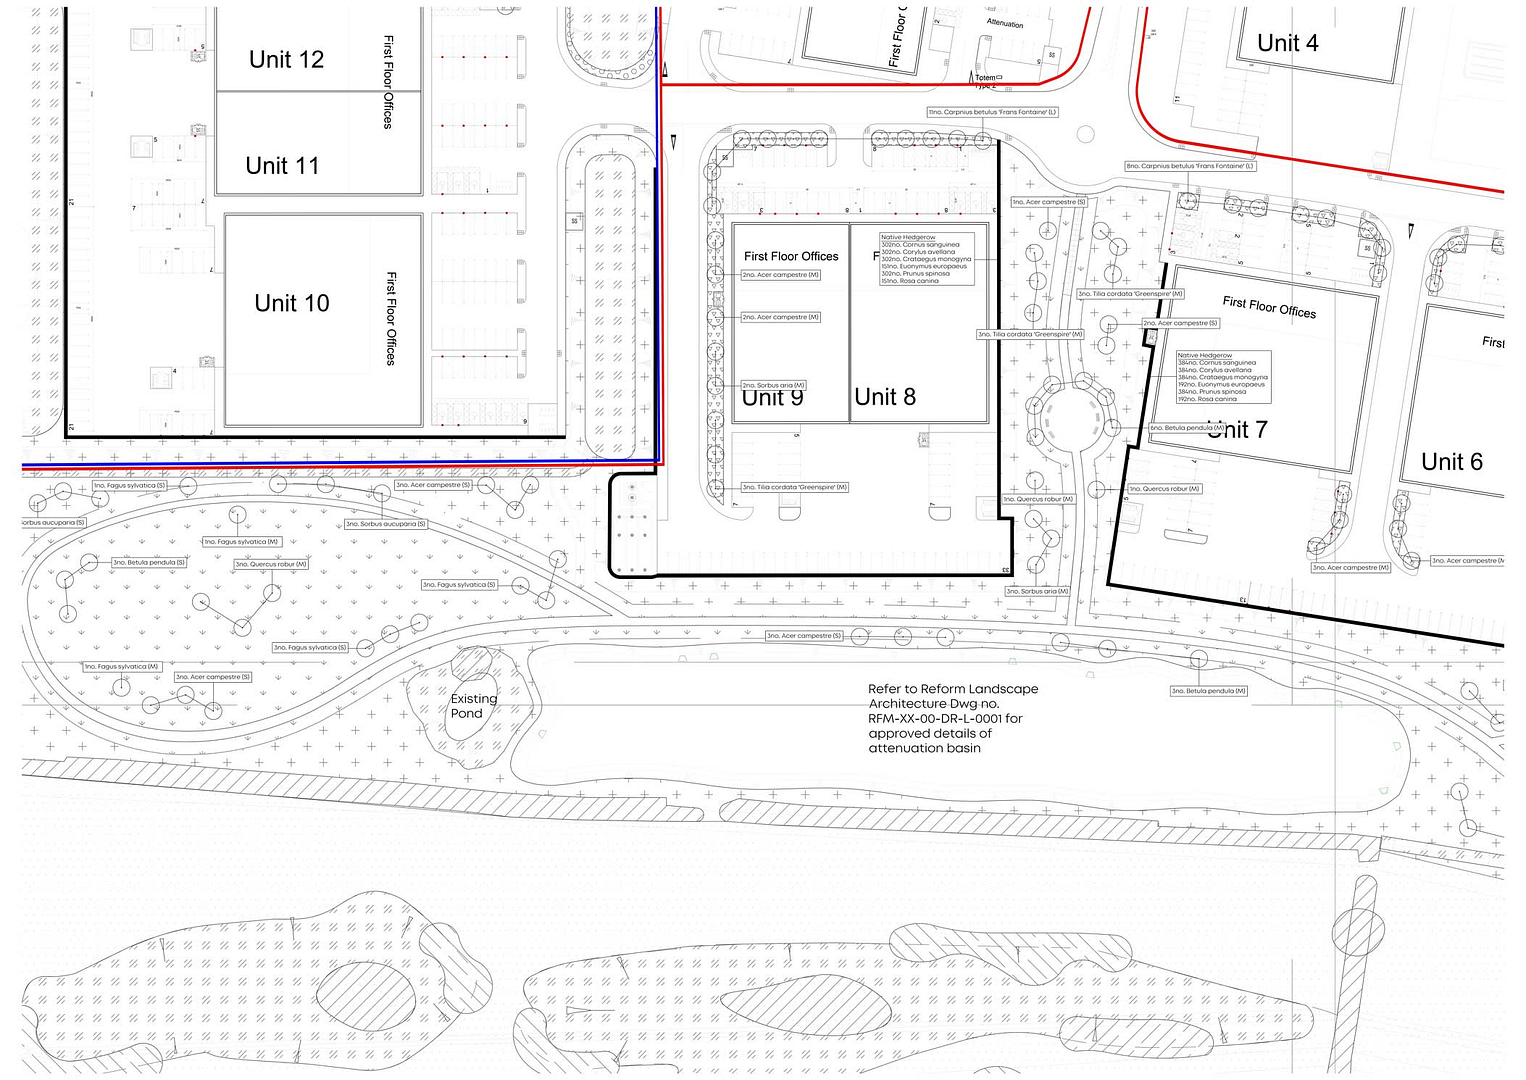 Landscape reserved matters drawing for Catalyst Bicester Phase 2